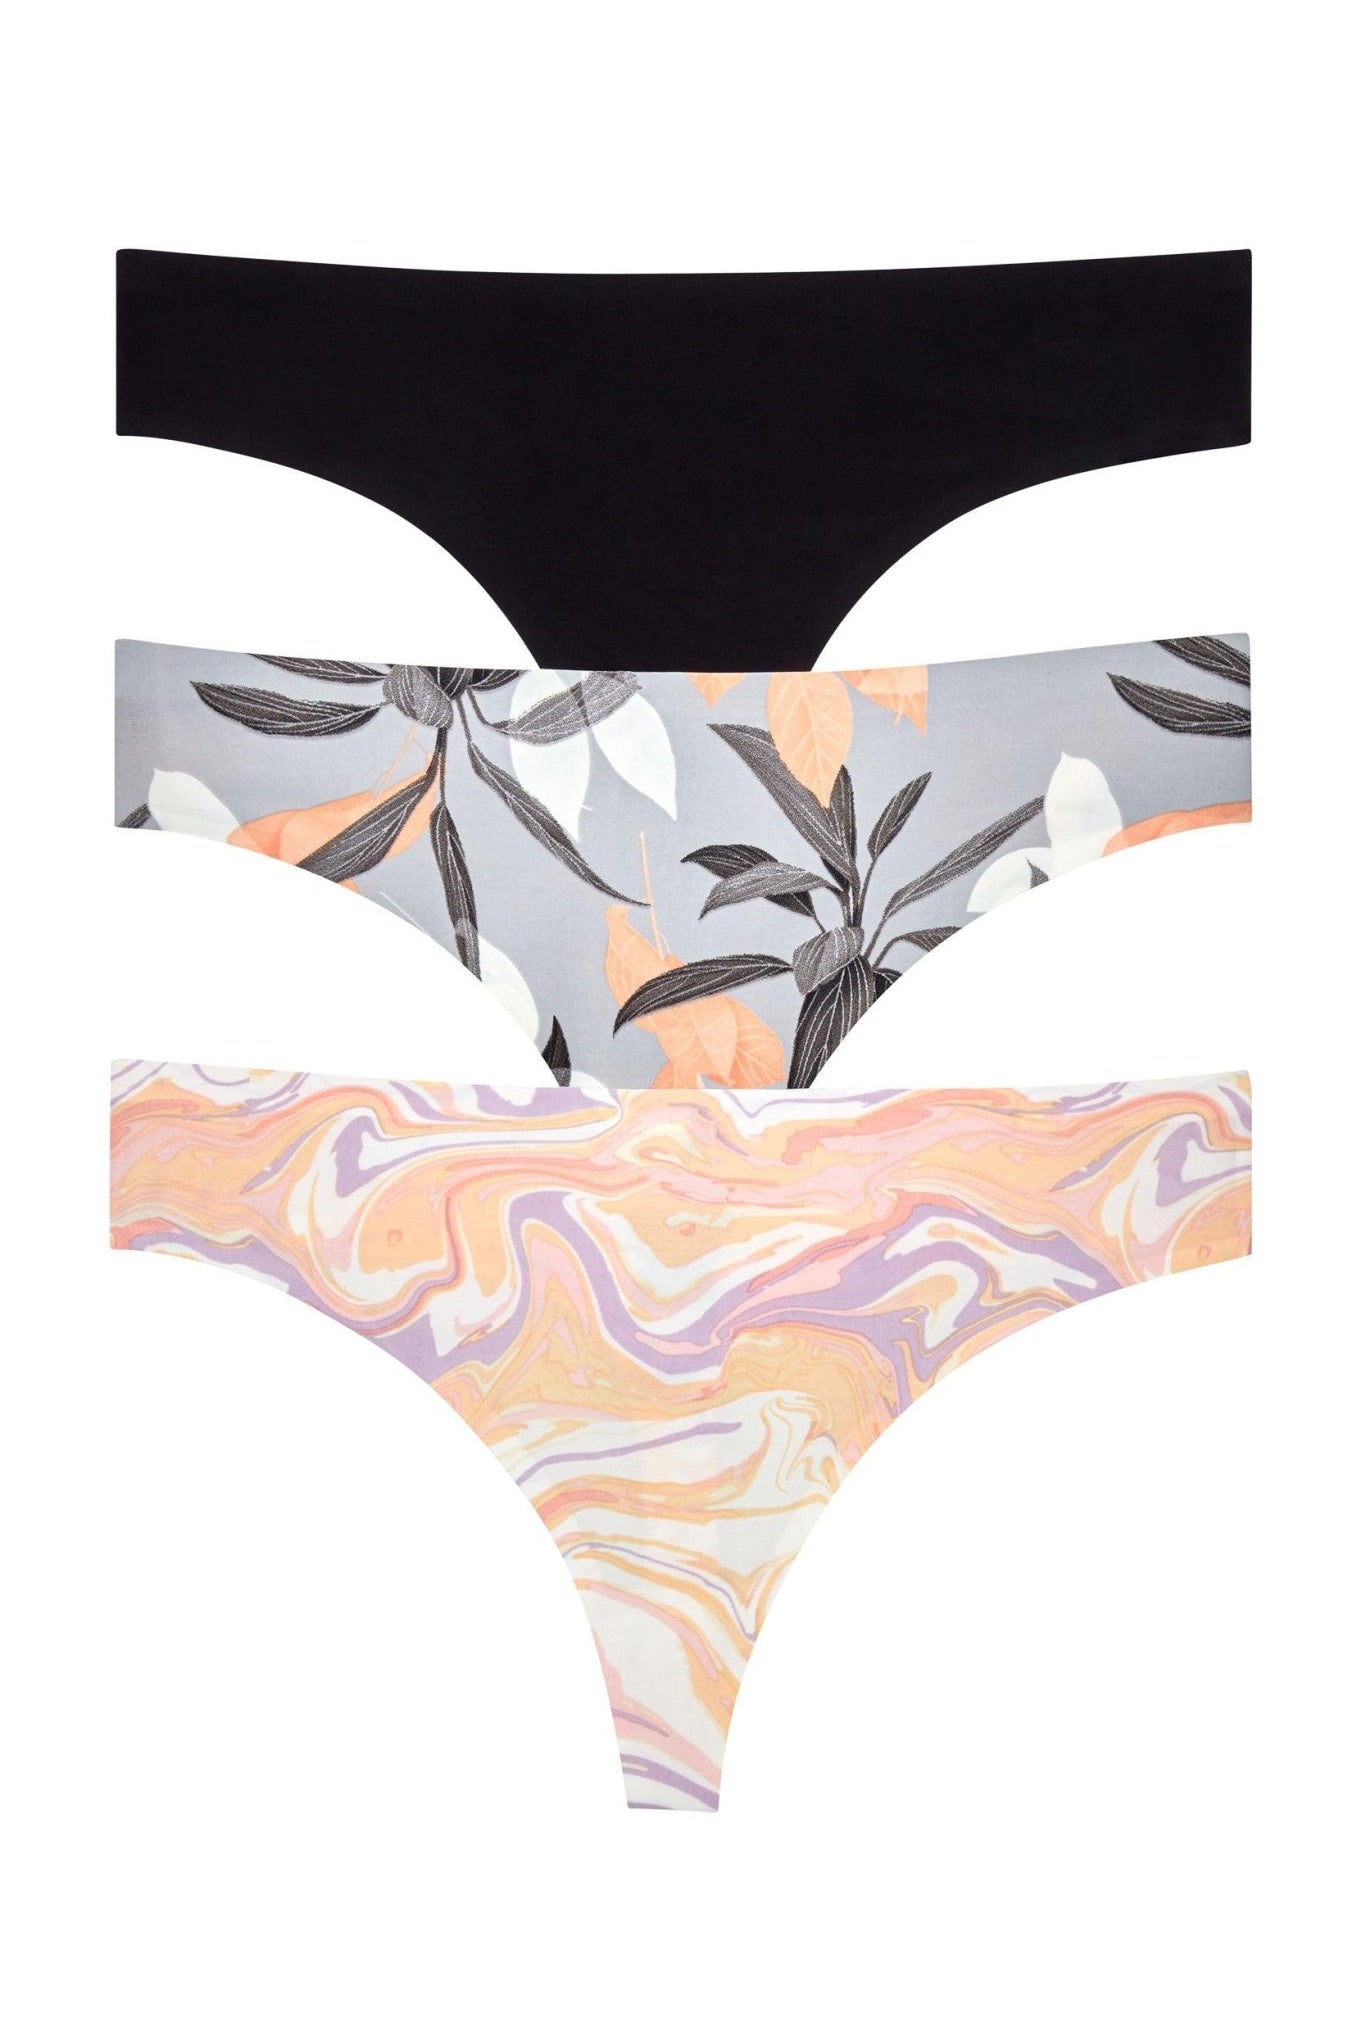 Skinz Thong 3-Pack - Panty - Black Grey Tropical Zion Marble